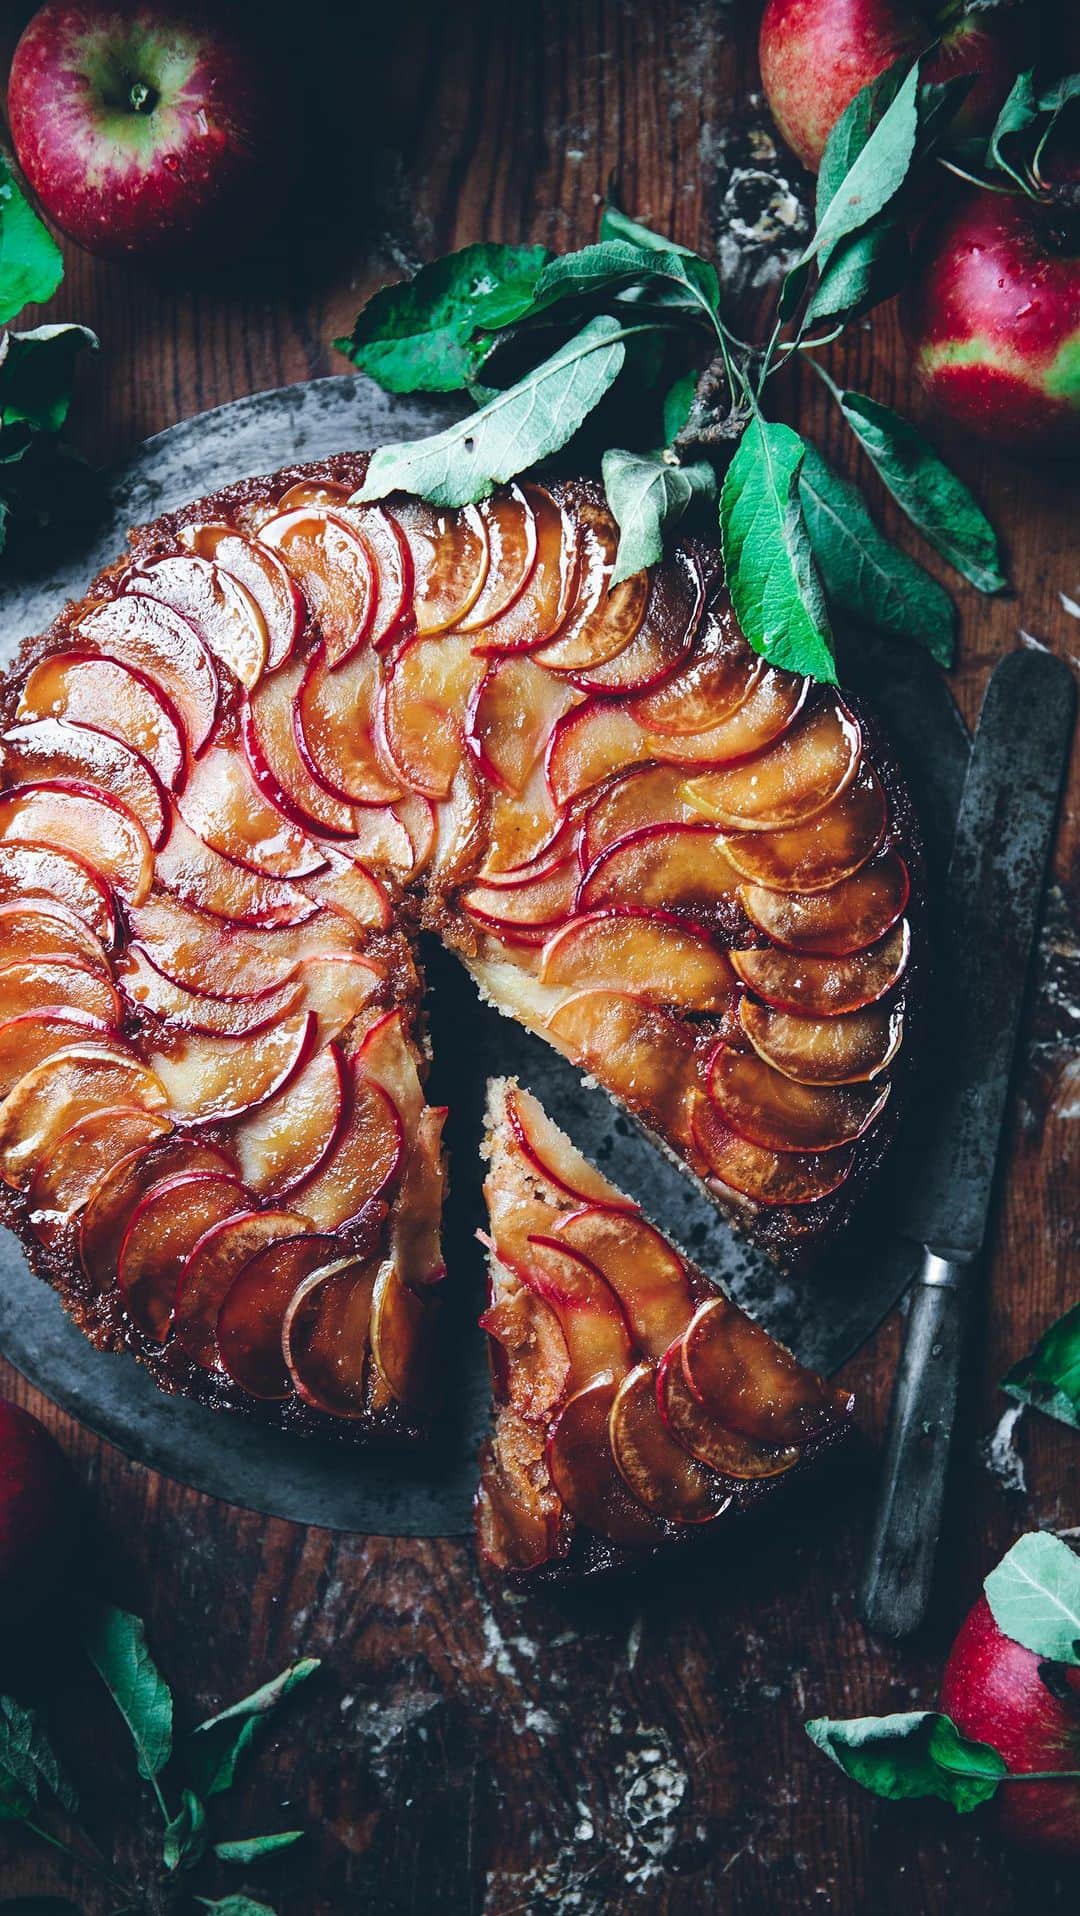 Linda Lomelinoのインスタグラム：「The perfect cake for the weekend - Apple upside down cake 🍏🍎🙃 served with whipped cream.  The recipe is linked in my profile!   #applecake #appleupsidedowncake」